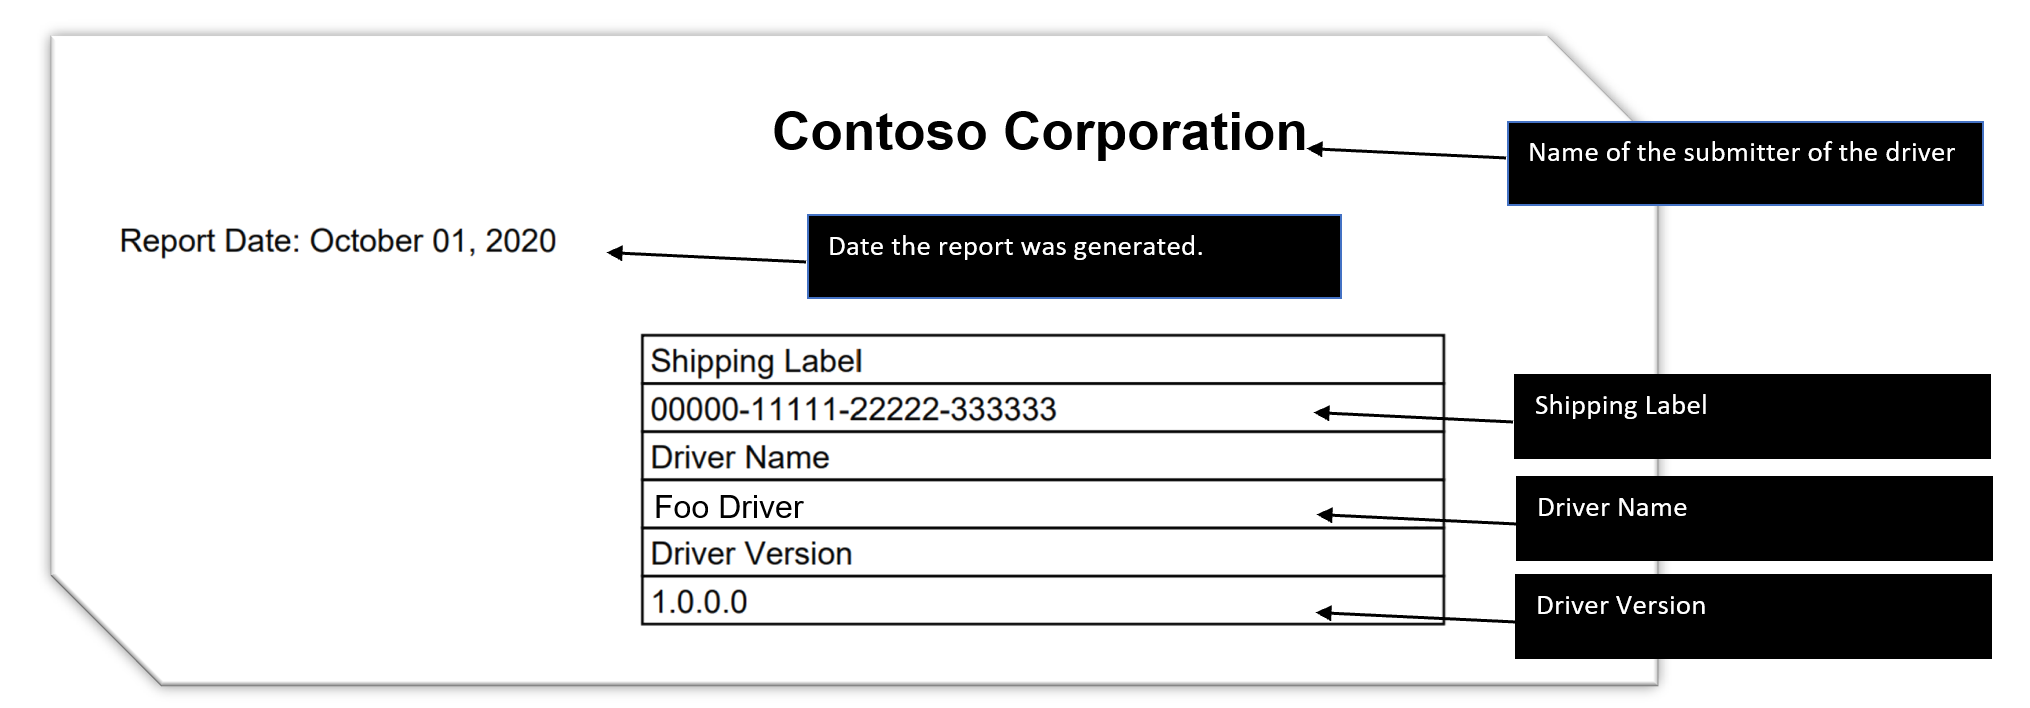 Screenshot of the Title section that includes the submitter company name, report date, shipping label, driver namem, and driver version.